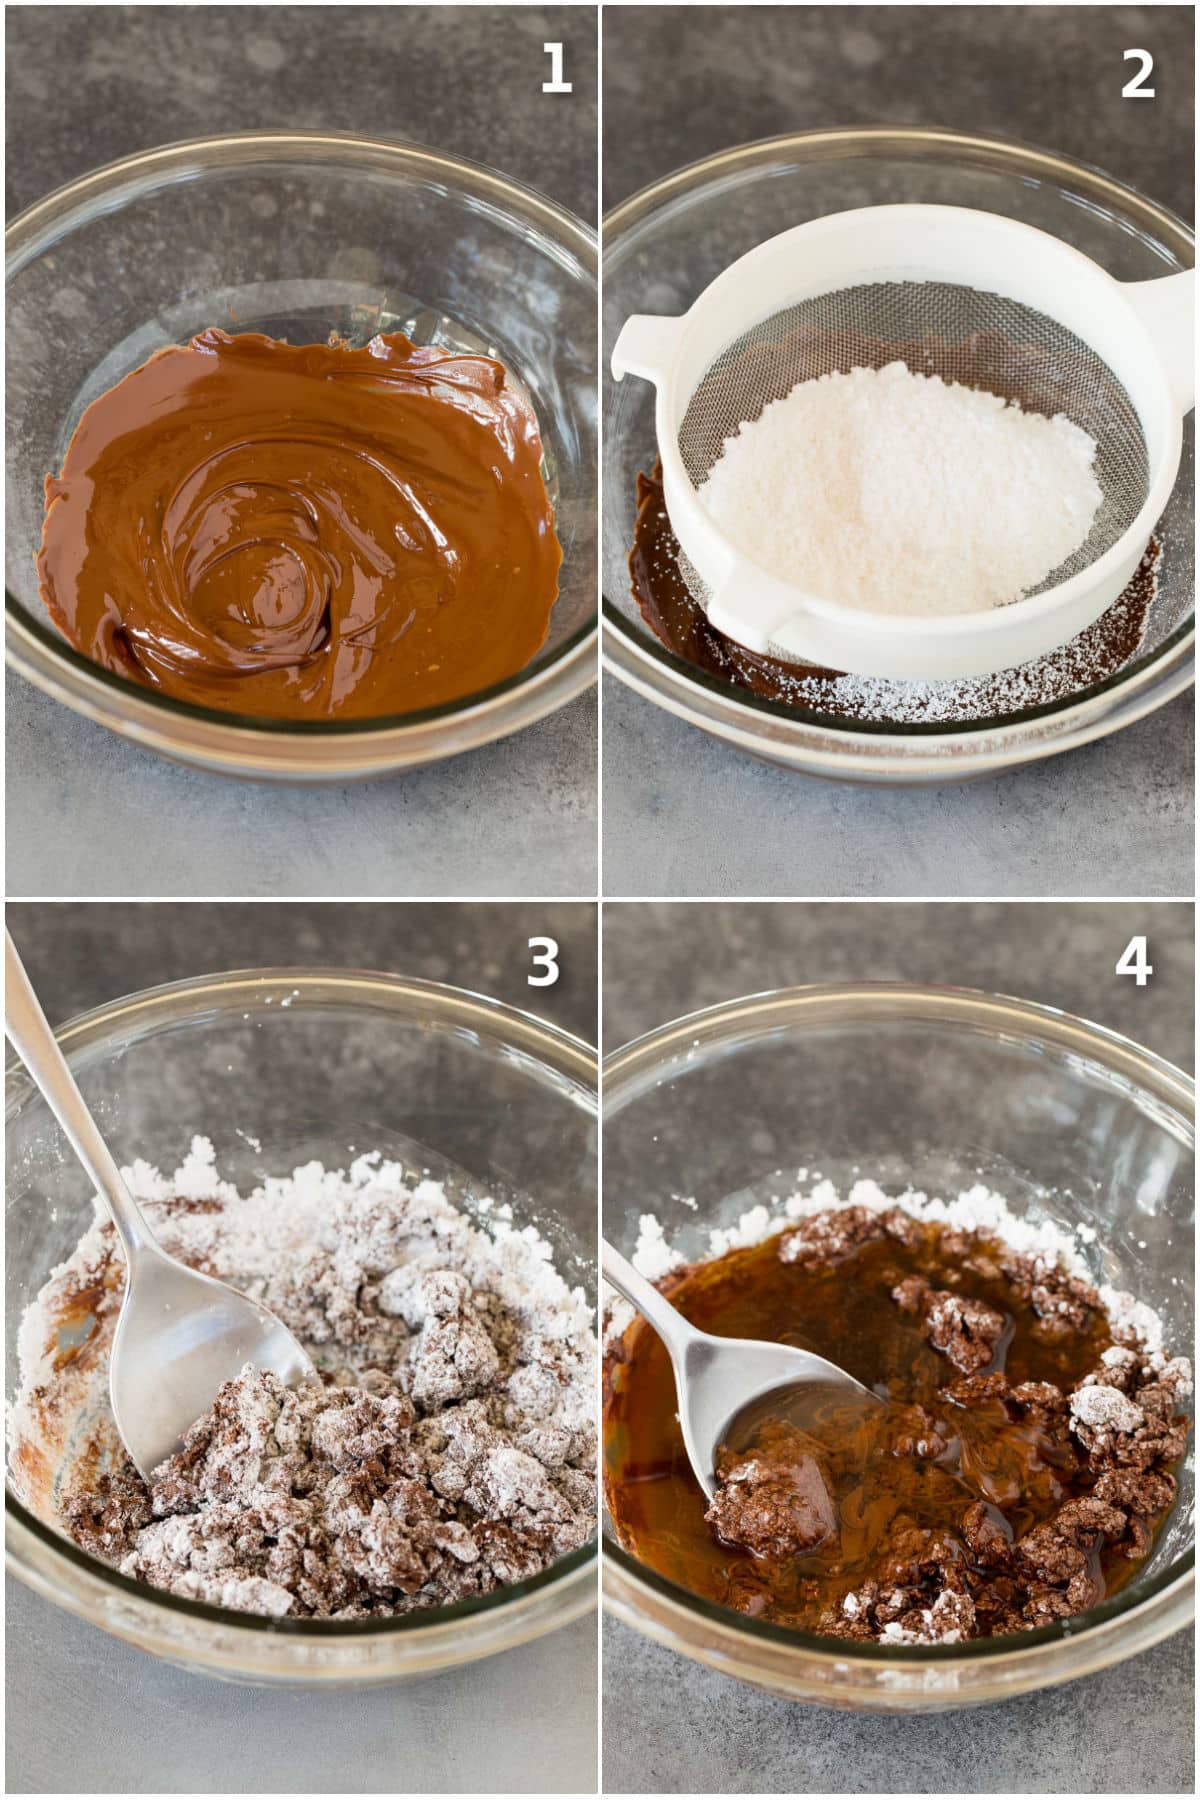 Step by step process shots showing melted chocolate being mixed with powdered sugar and rum.